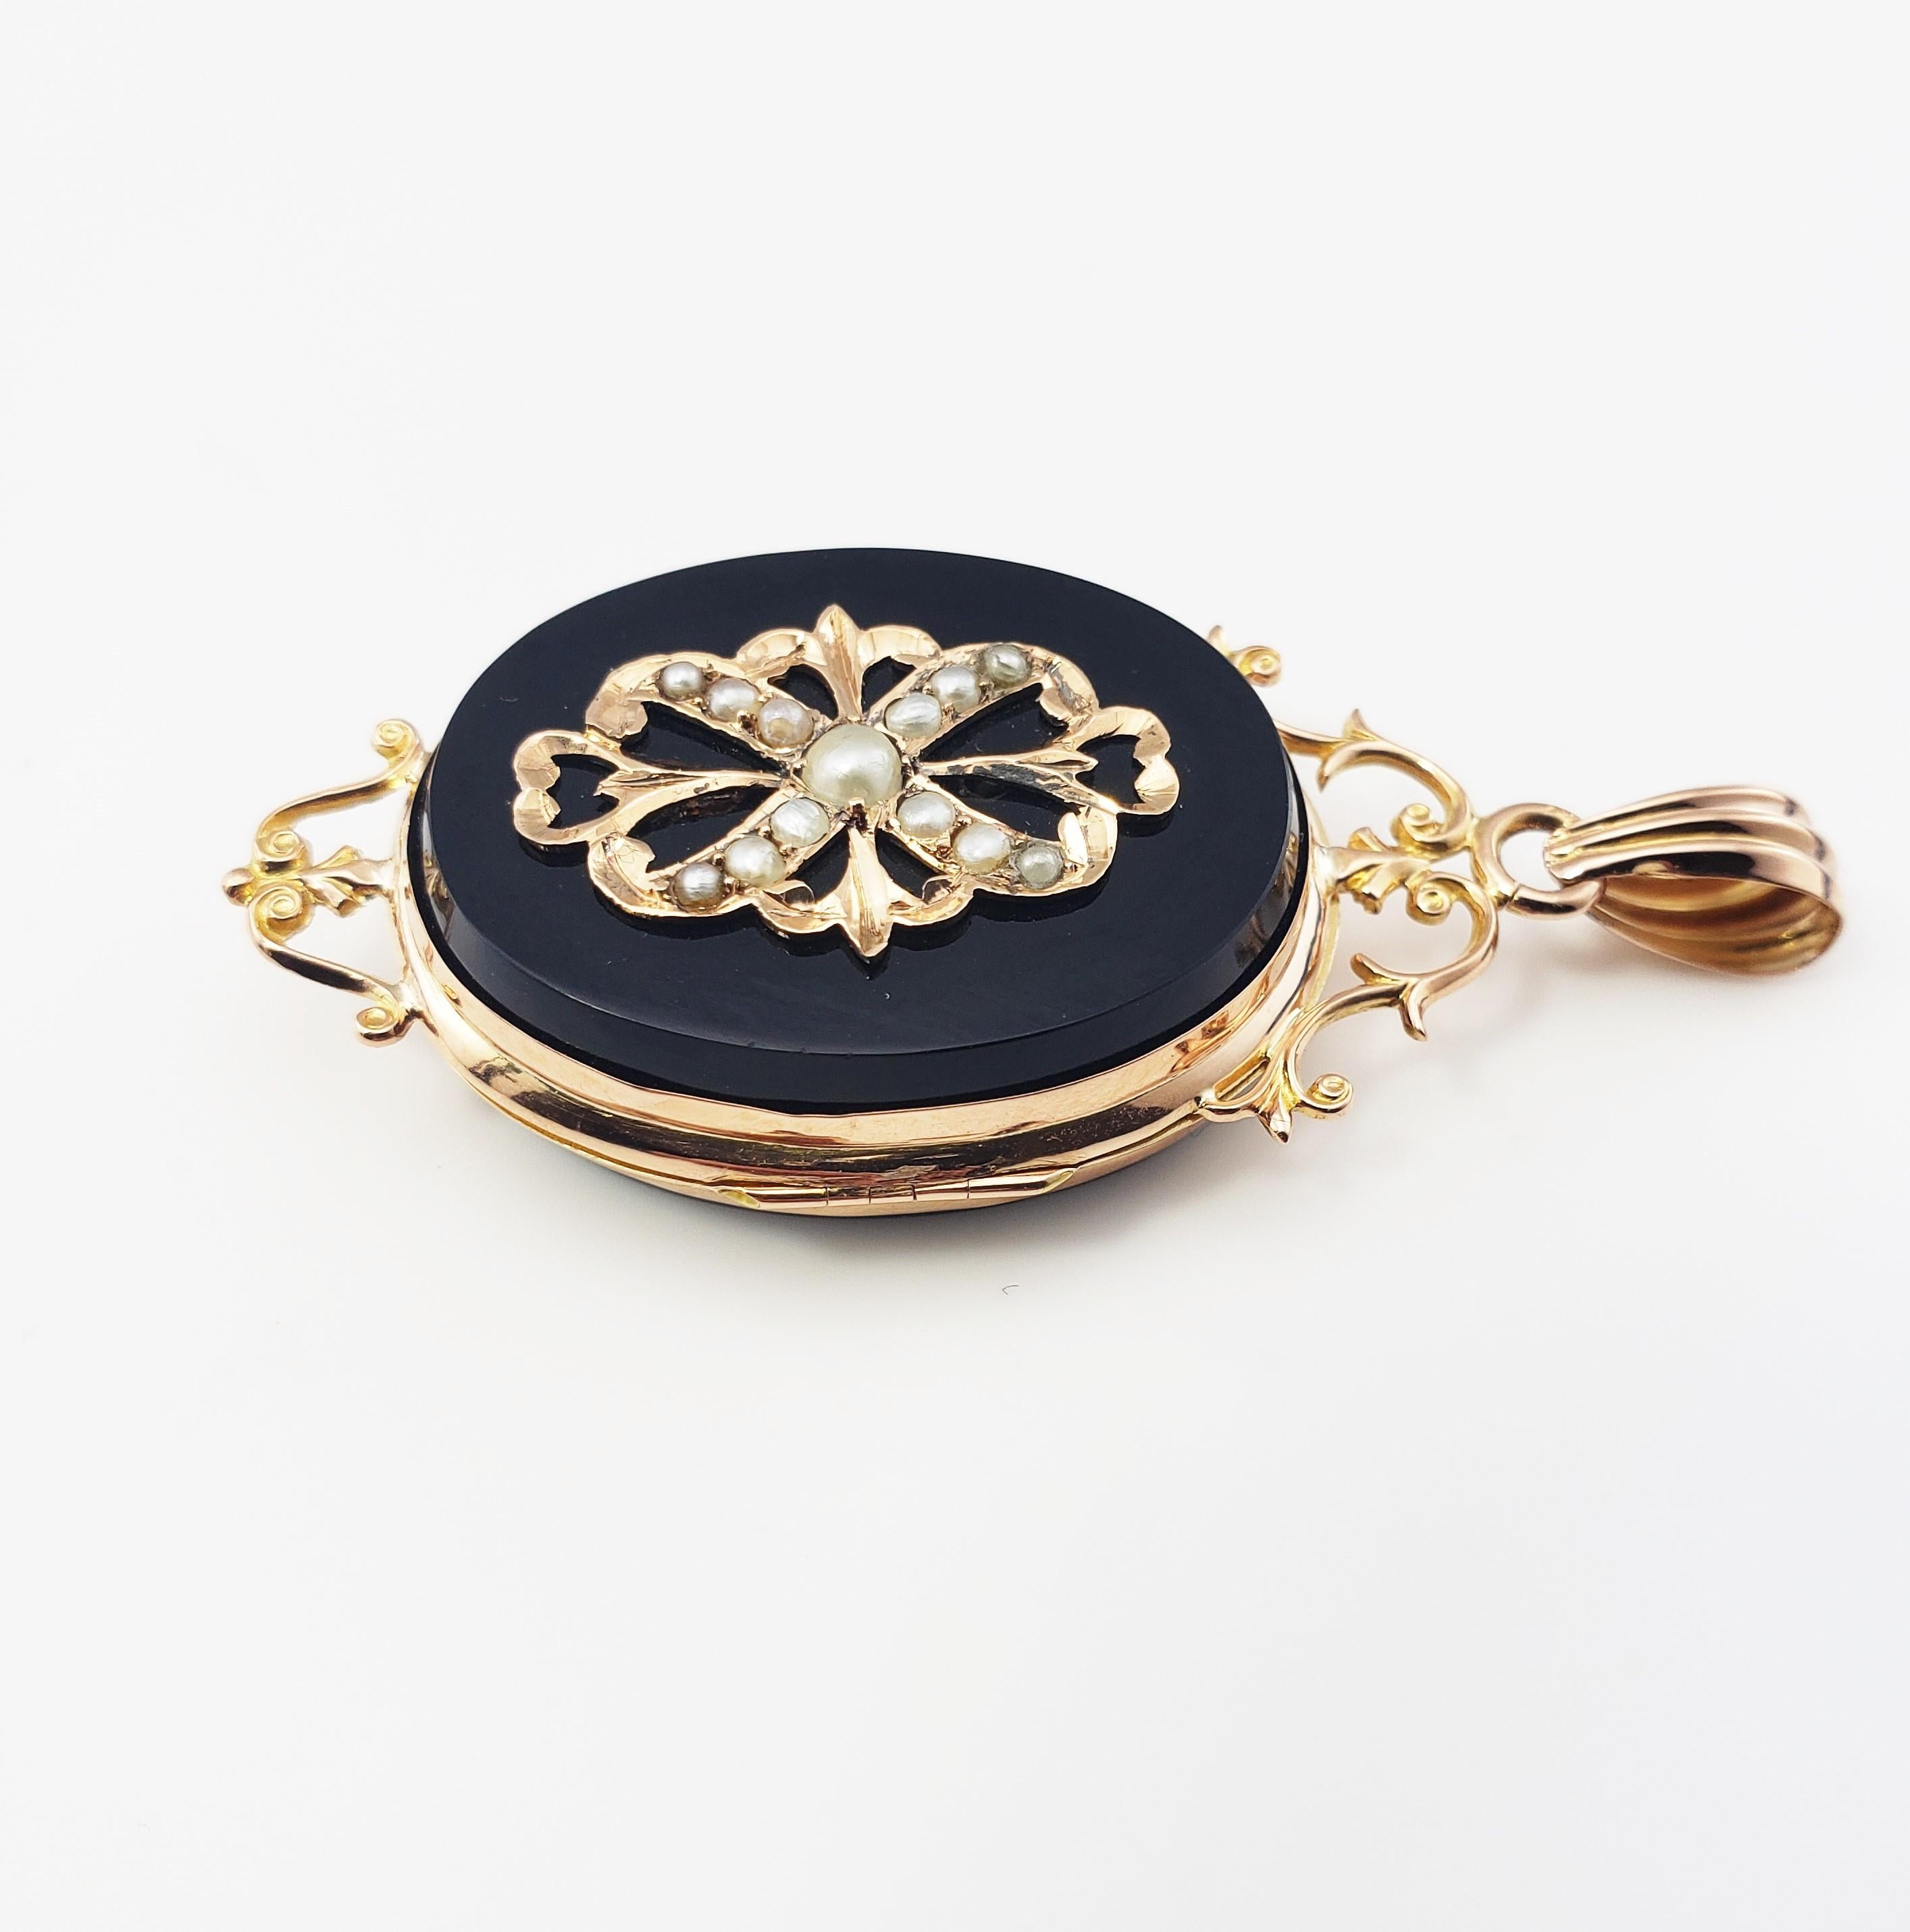 Vintage 14 Karat Yellow Gold Onyx and Pearl Locket

This lovely hinged black onyx locket is decorated with 12 seed pearls and beautifully detailed 14k yellow gold.

Size: 45 mm x 24 mm

Weight: 7.5 dwt. / 11.8 gr.

Acid tested for 14K gold.

Very